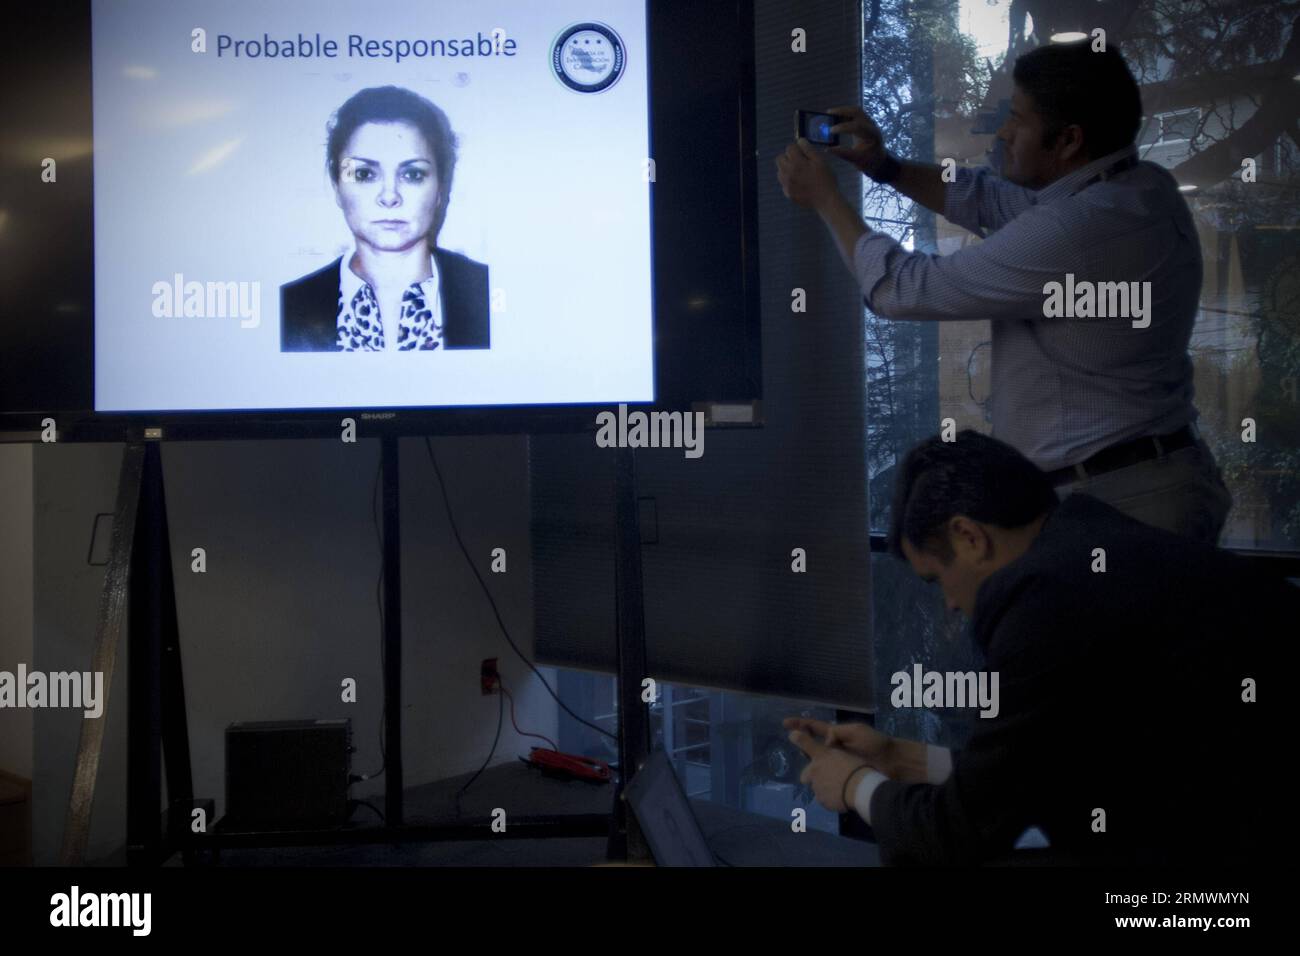 (141105) -- MEXICO CITY, Nov. 4, 2014 -- Photo taken on Nov. 4, 2014 shows a photo of Maria de los Angeles Pineda, wife of the ex-mayor of Iguala Jose Luis Abarca, during the press conference on the detention of them in Mexico City, capital of Mexico. Mexican authorities Tuesday captured a fugitive former mayor wanted for his role in the abduction of 43 students in late September. The ex-mayor of Iguala, in Mexico s southern state of Guerrero, Jose Luis Abarca and his wife Maria de los Angeles Pineda were captured in a pre-dawn raid on the house where they were staying in Mexico City s populou Stock Photo